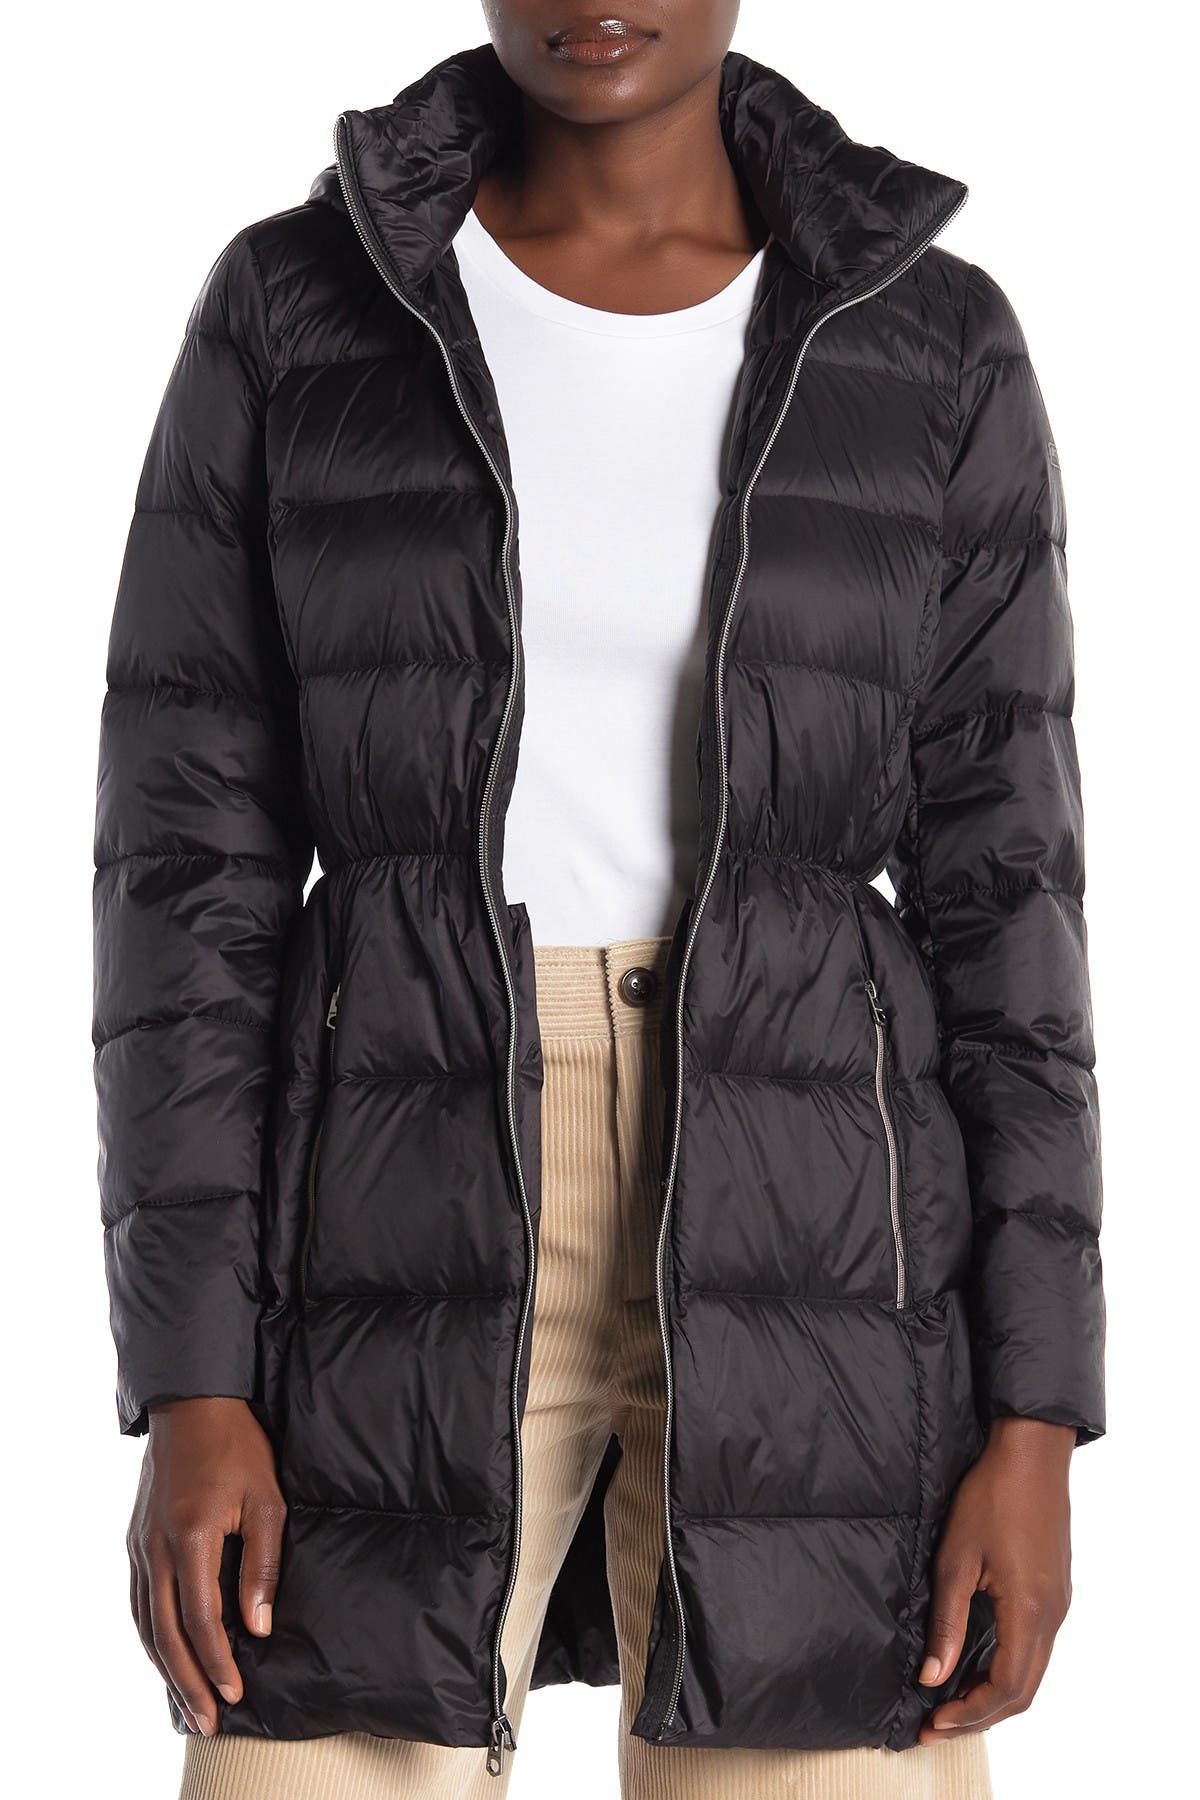 lucky brand down jacket